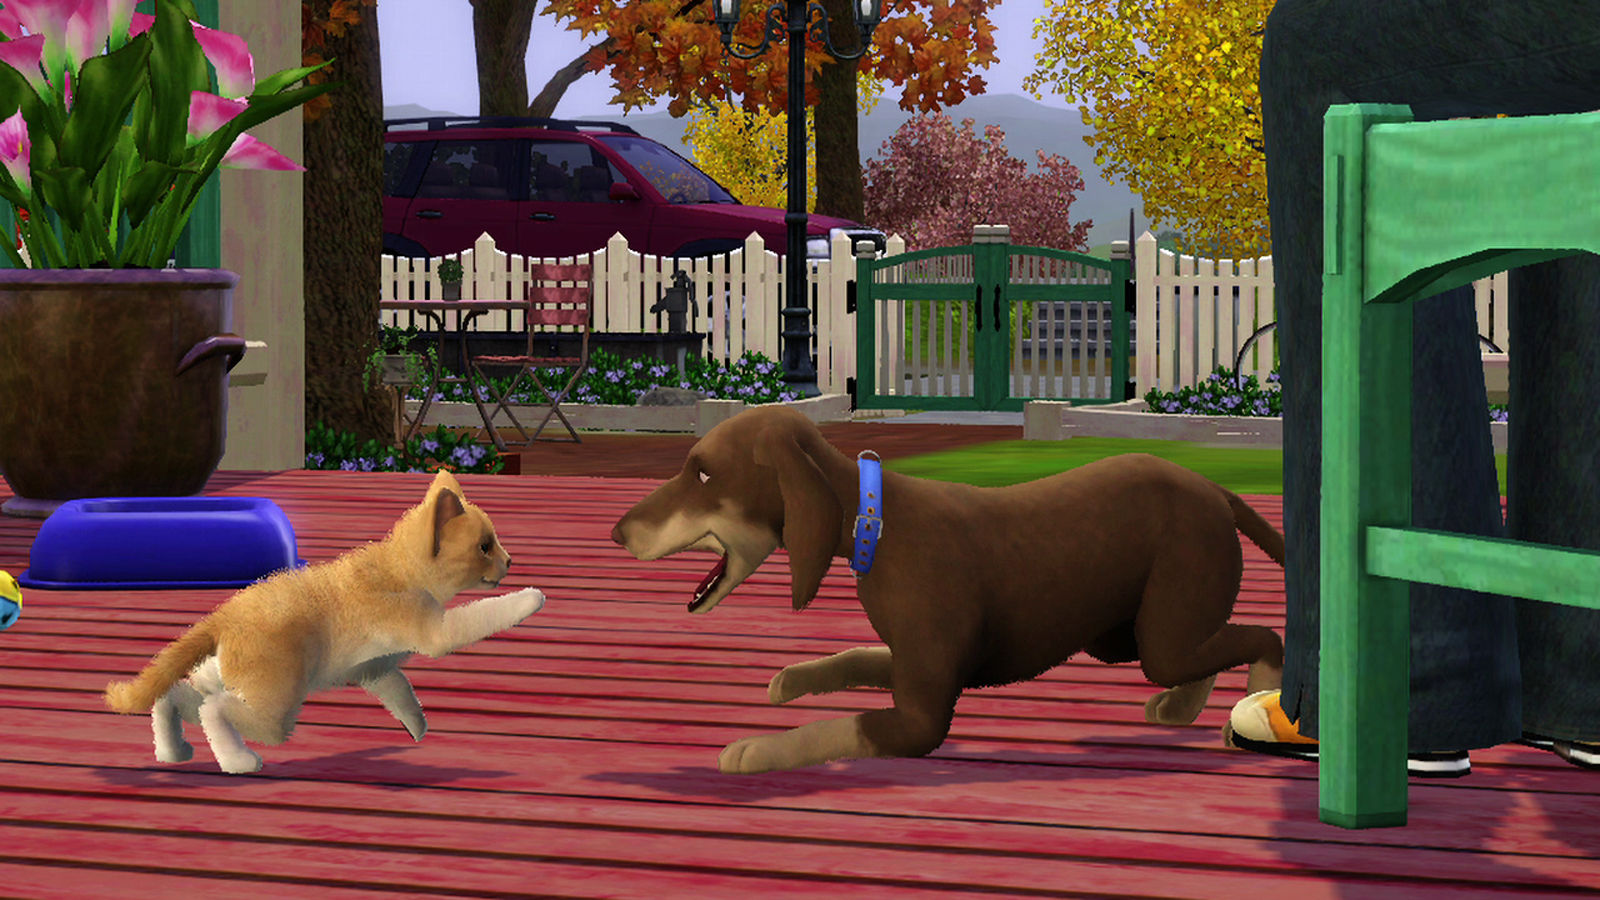 sims 4 cats and dogs pc download for free